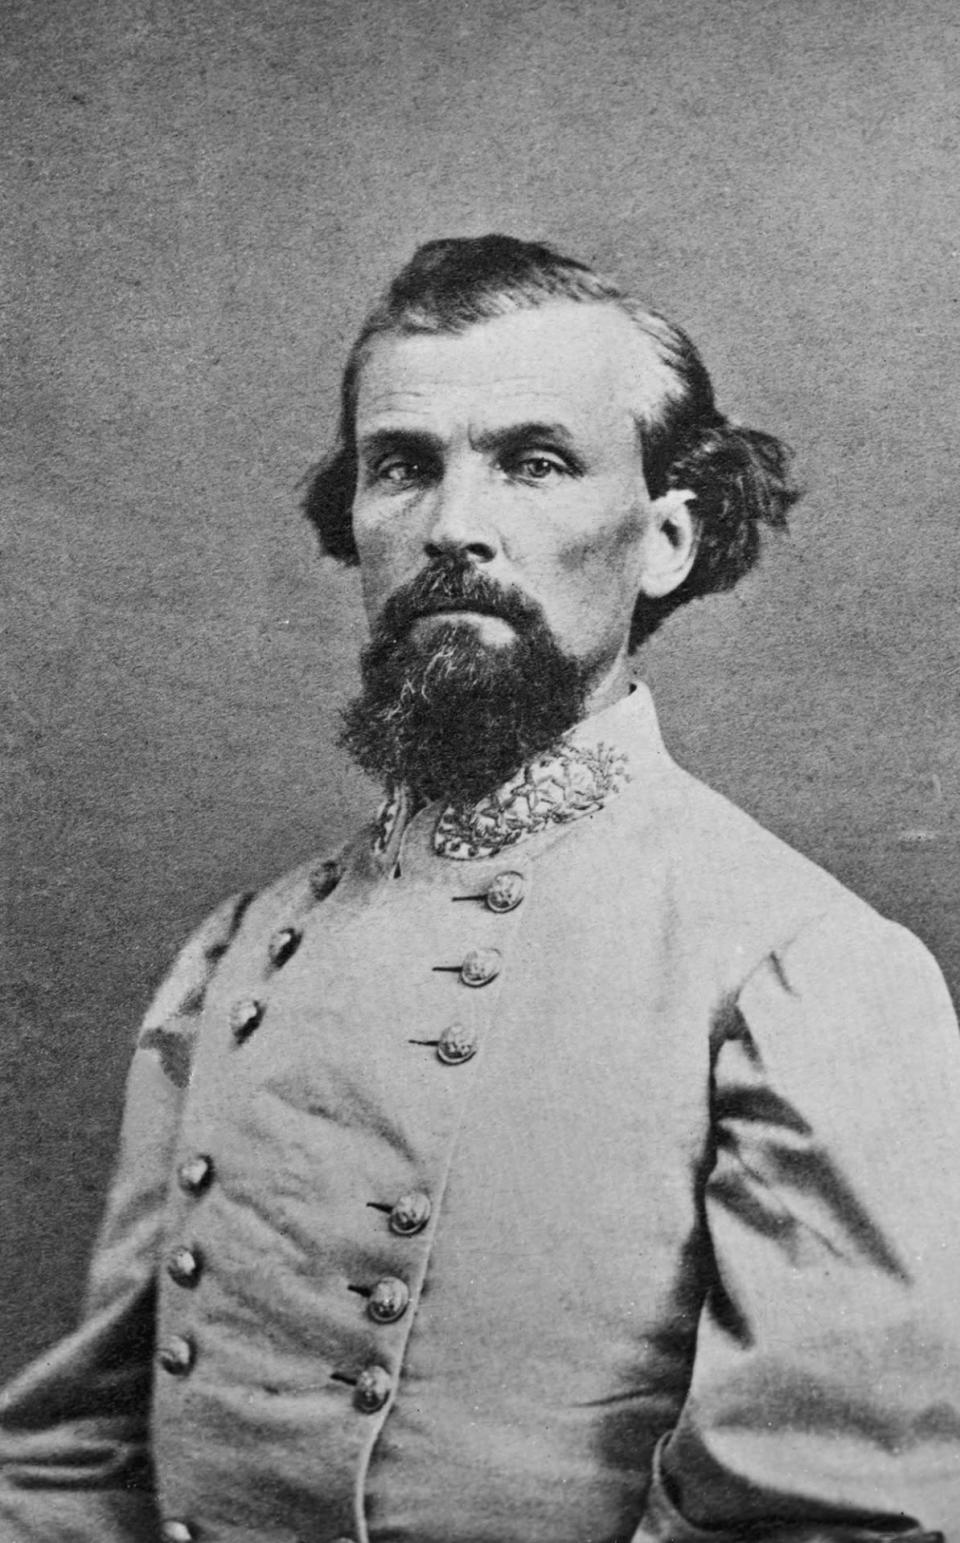 <p>Confederate Major General, Nathan Bedford Forrest, (1821-1877). He was the founder of the Ku Klux Klan, and leader from 1866-1869. Undated photograph. (Getty Images) </p>